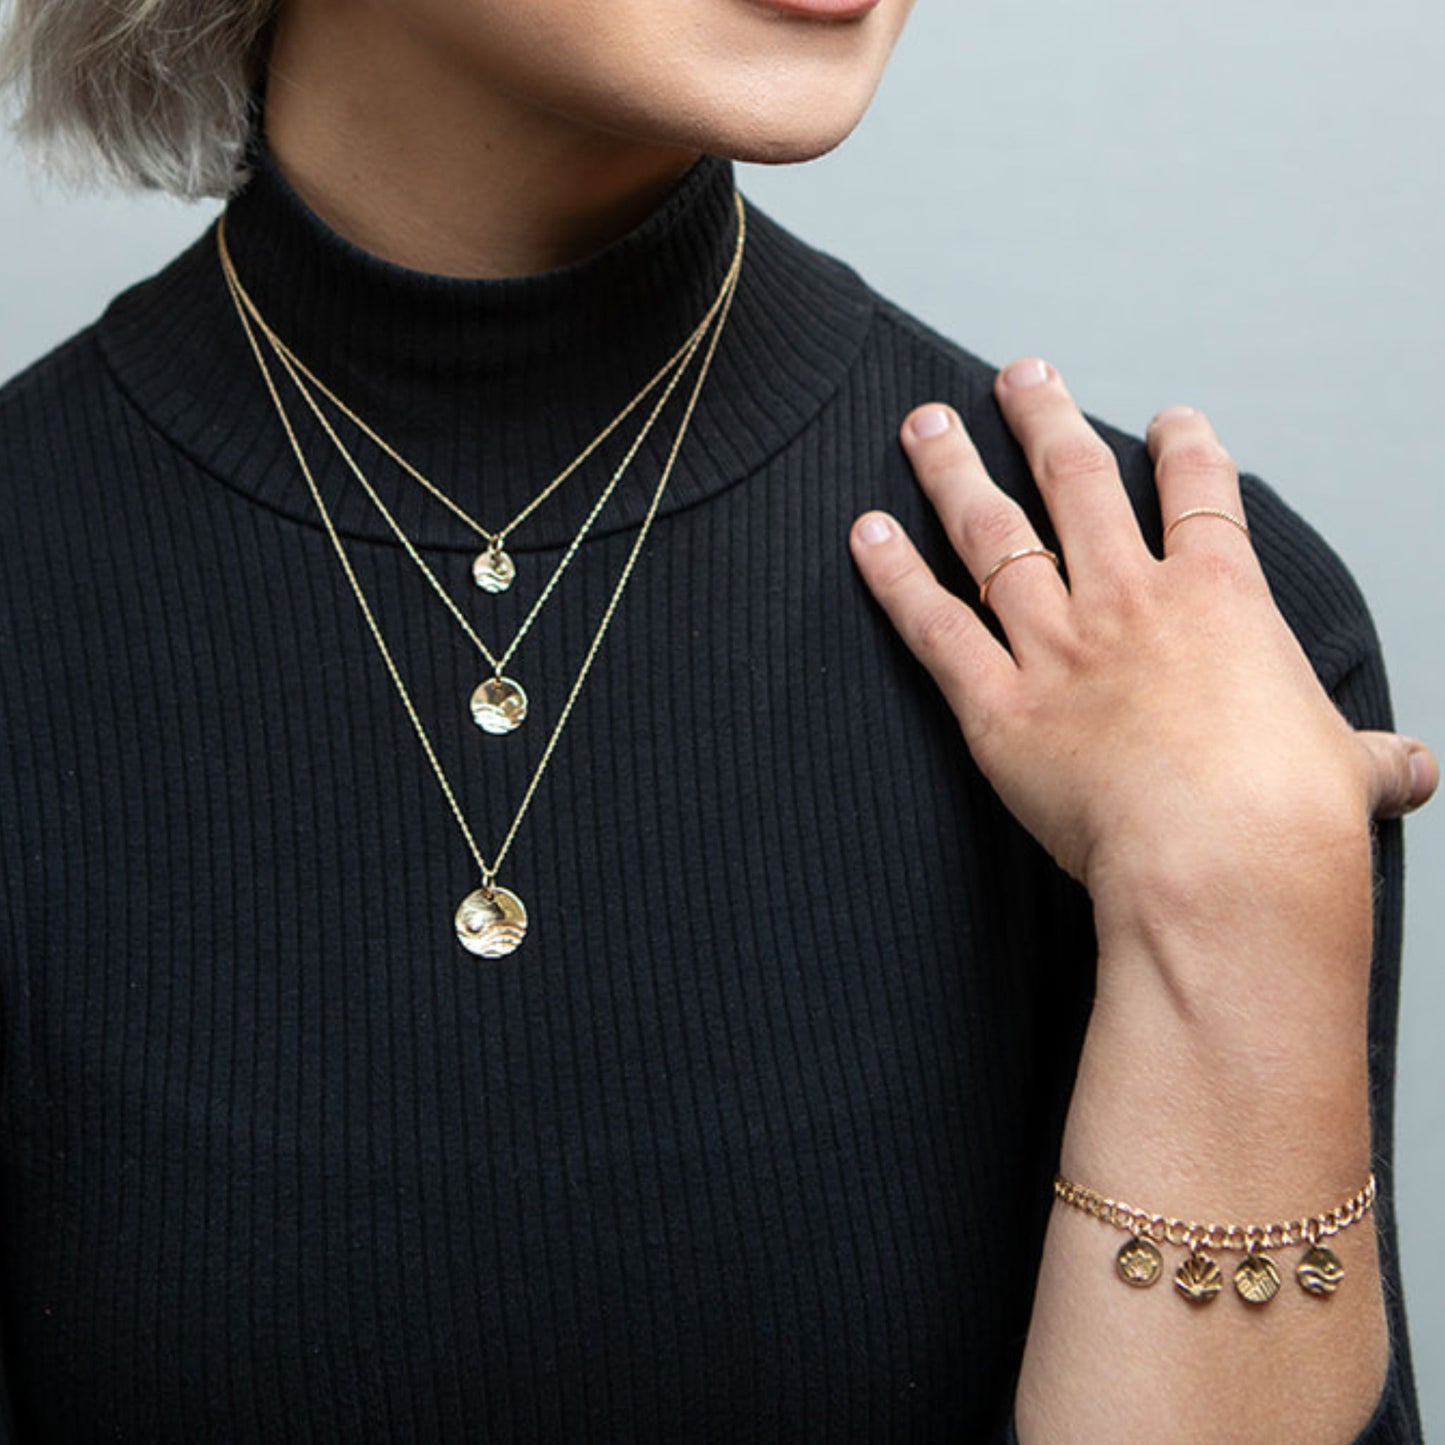 Model wearing gold reflections jewelry